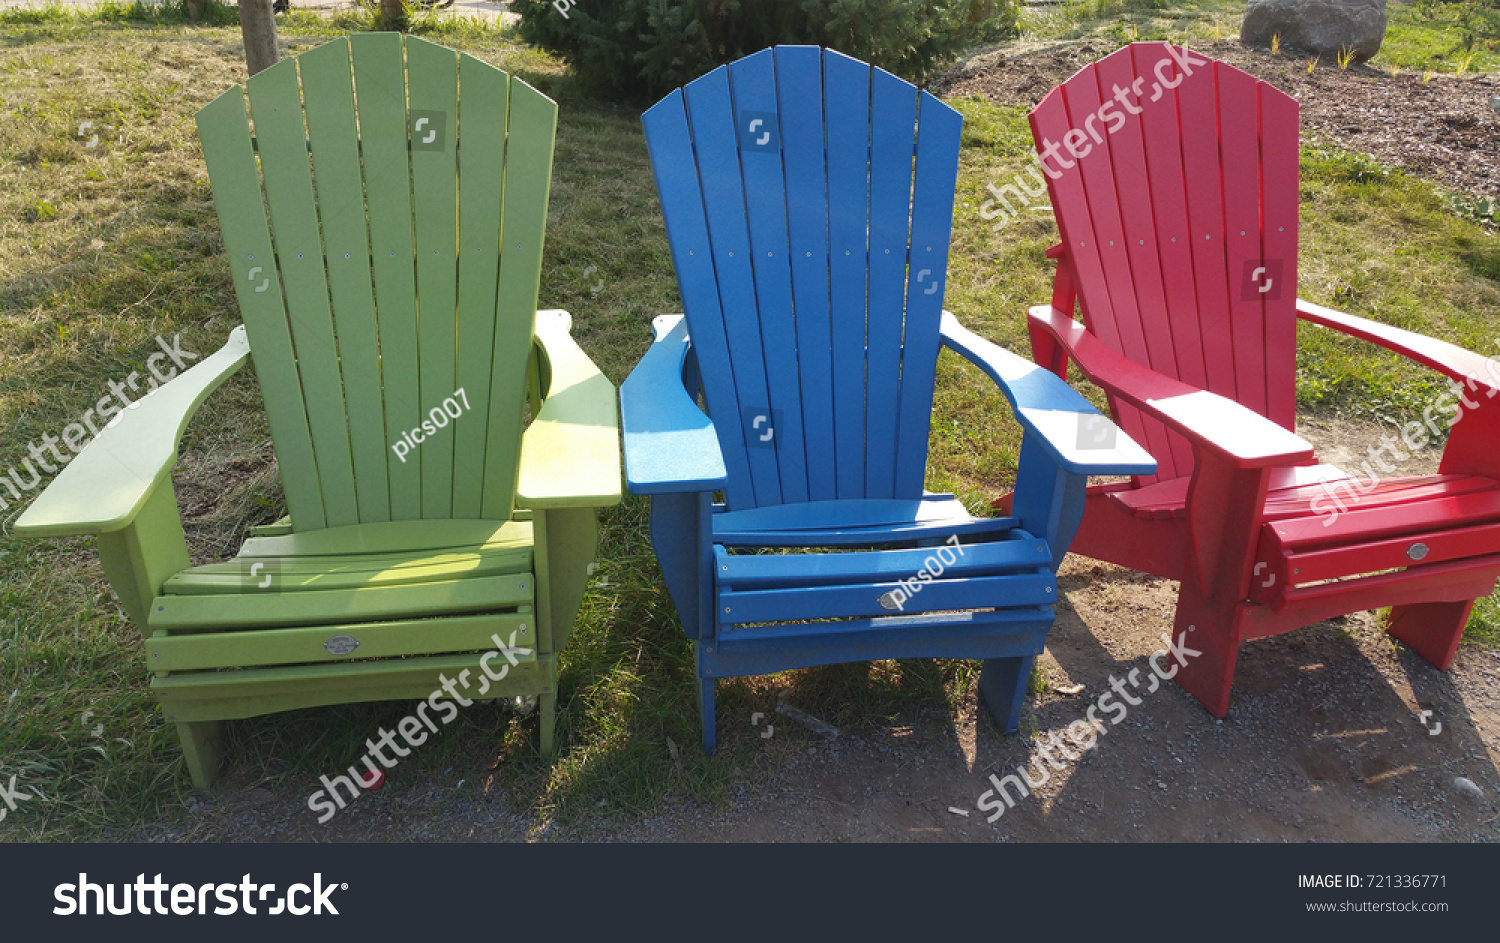 Wooden Colorful Outdoor Lawn Chairs Royalty Free Stock Image